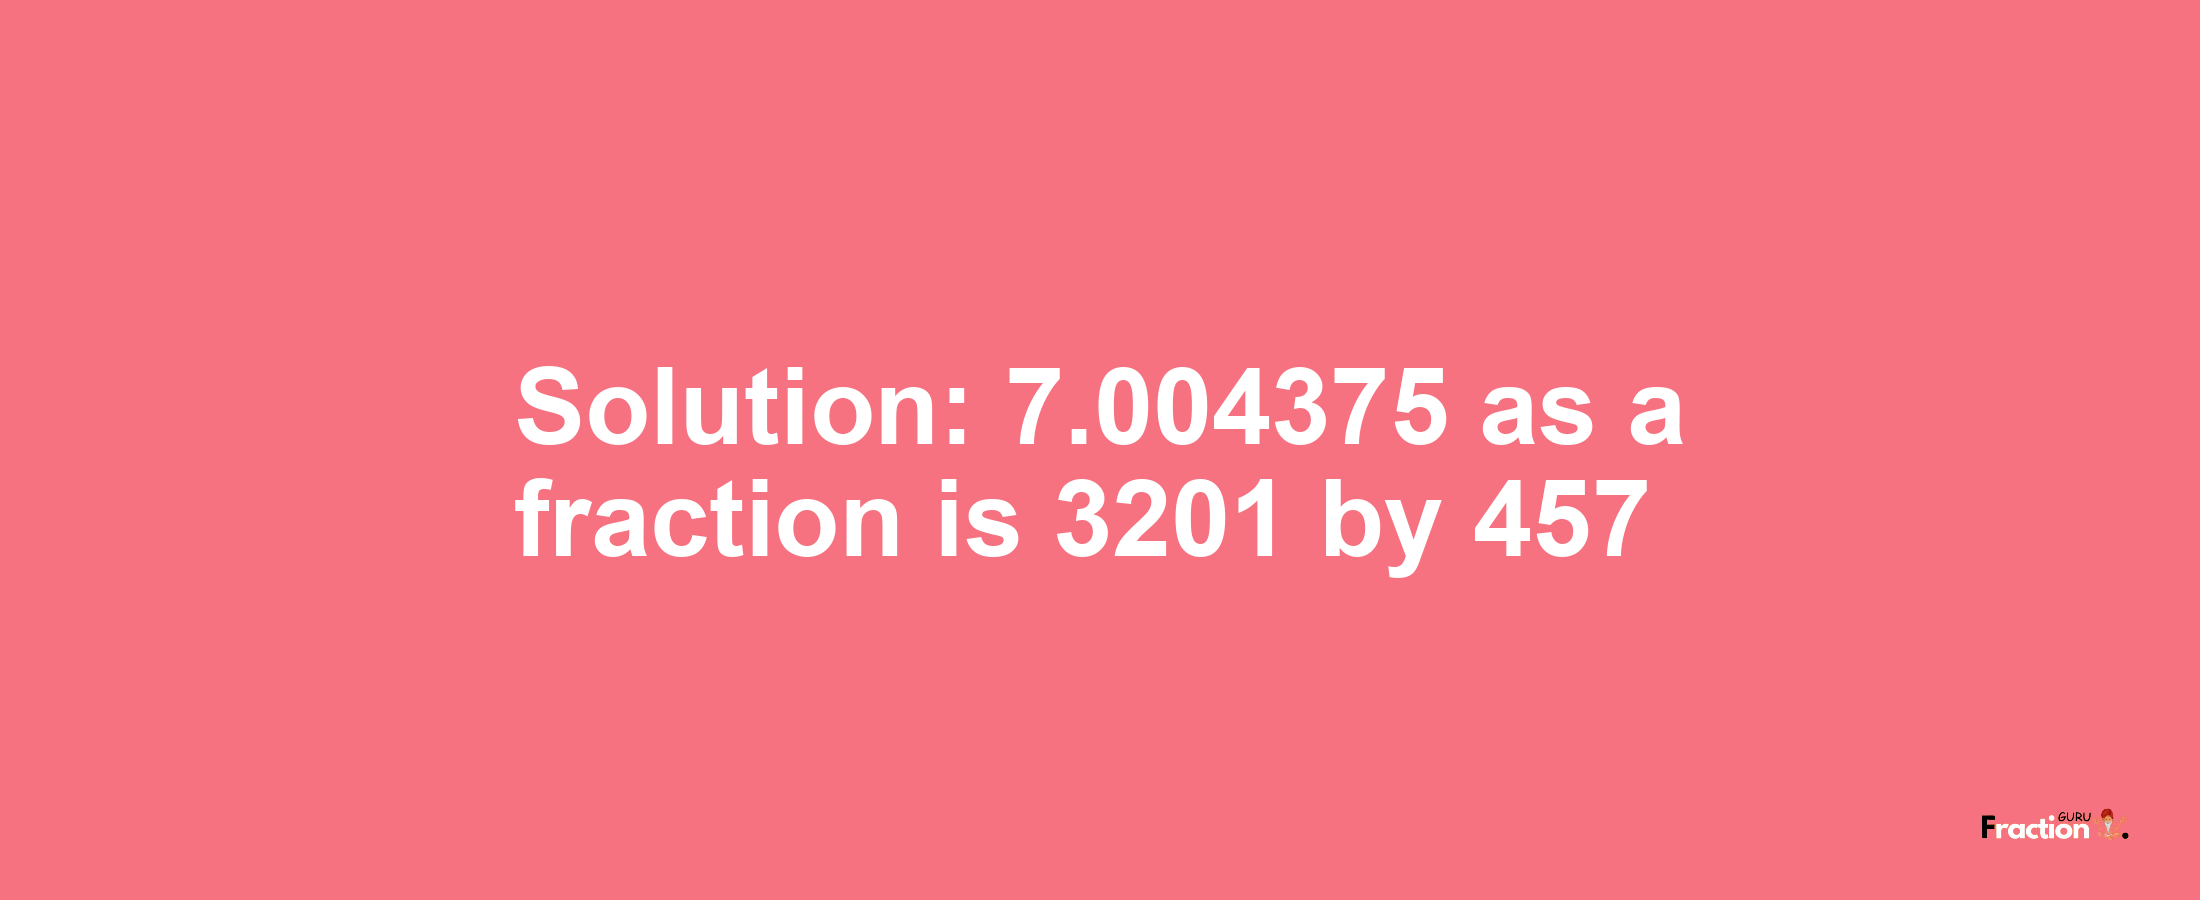 Solution:7.004375 as a fraction is 3201/457